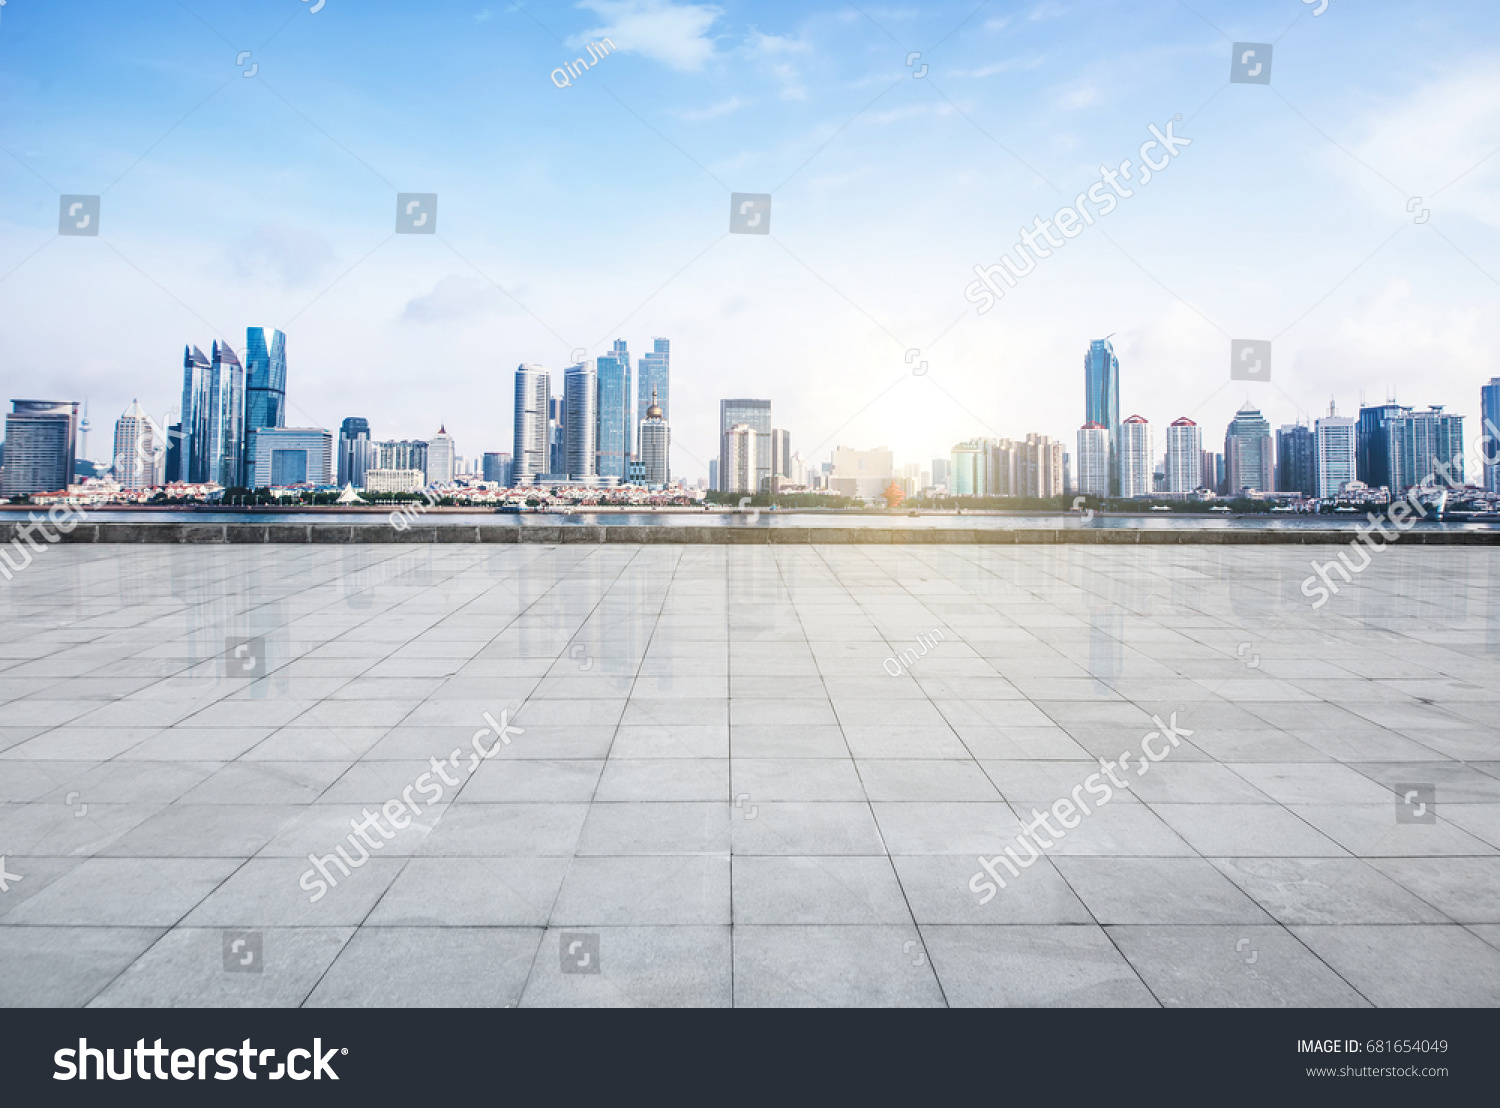 Panoramic skyline and buildings with empty concrete square floor #681654049